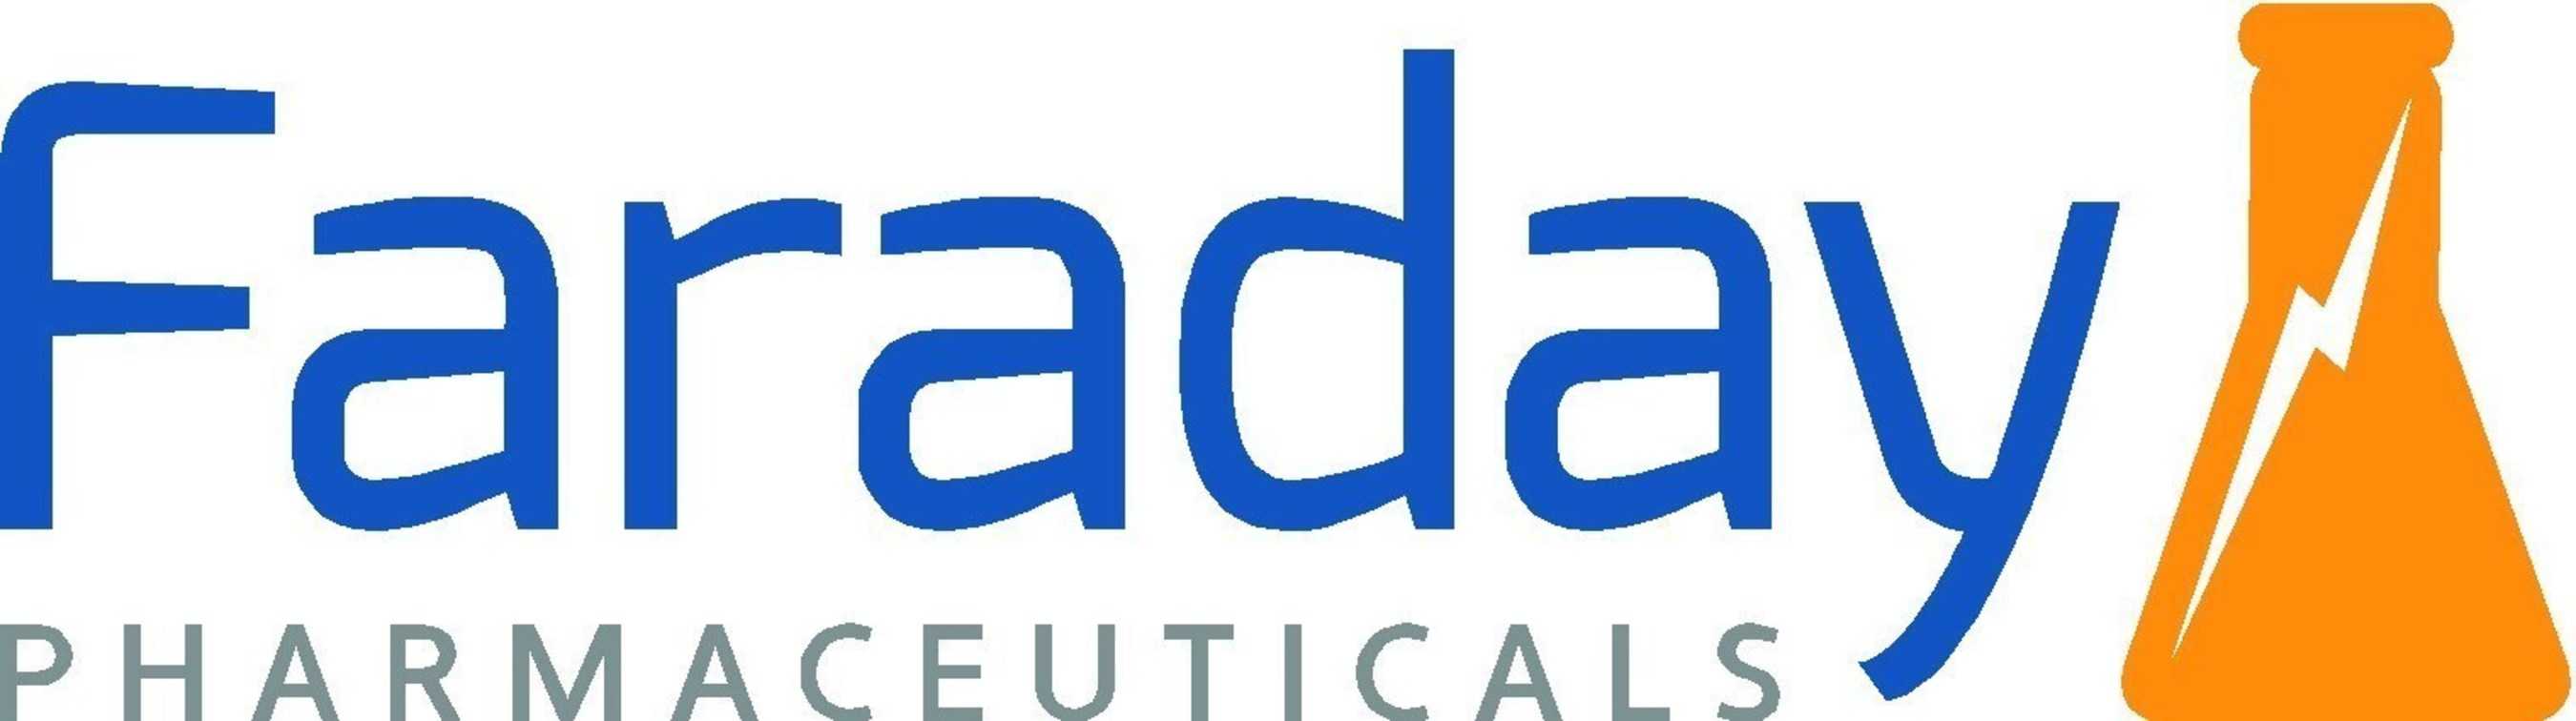 Faraday Pharmaceuticals is a biopharmaceutical company focused on the research and development of elemental reducing agents. Visit  www.faradaypharma.com . (PRNewsFoto/Faraday Pharmaceuticals)